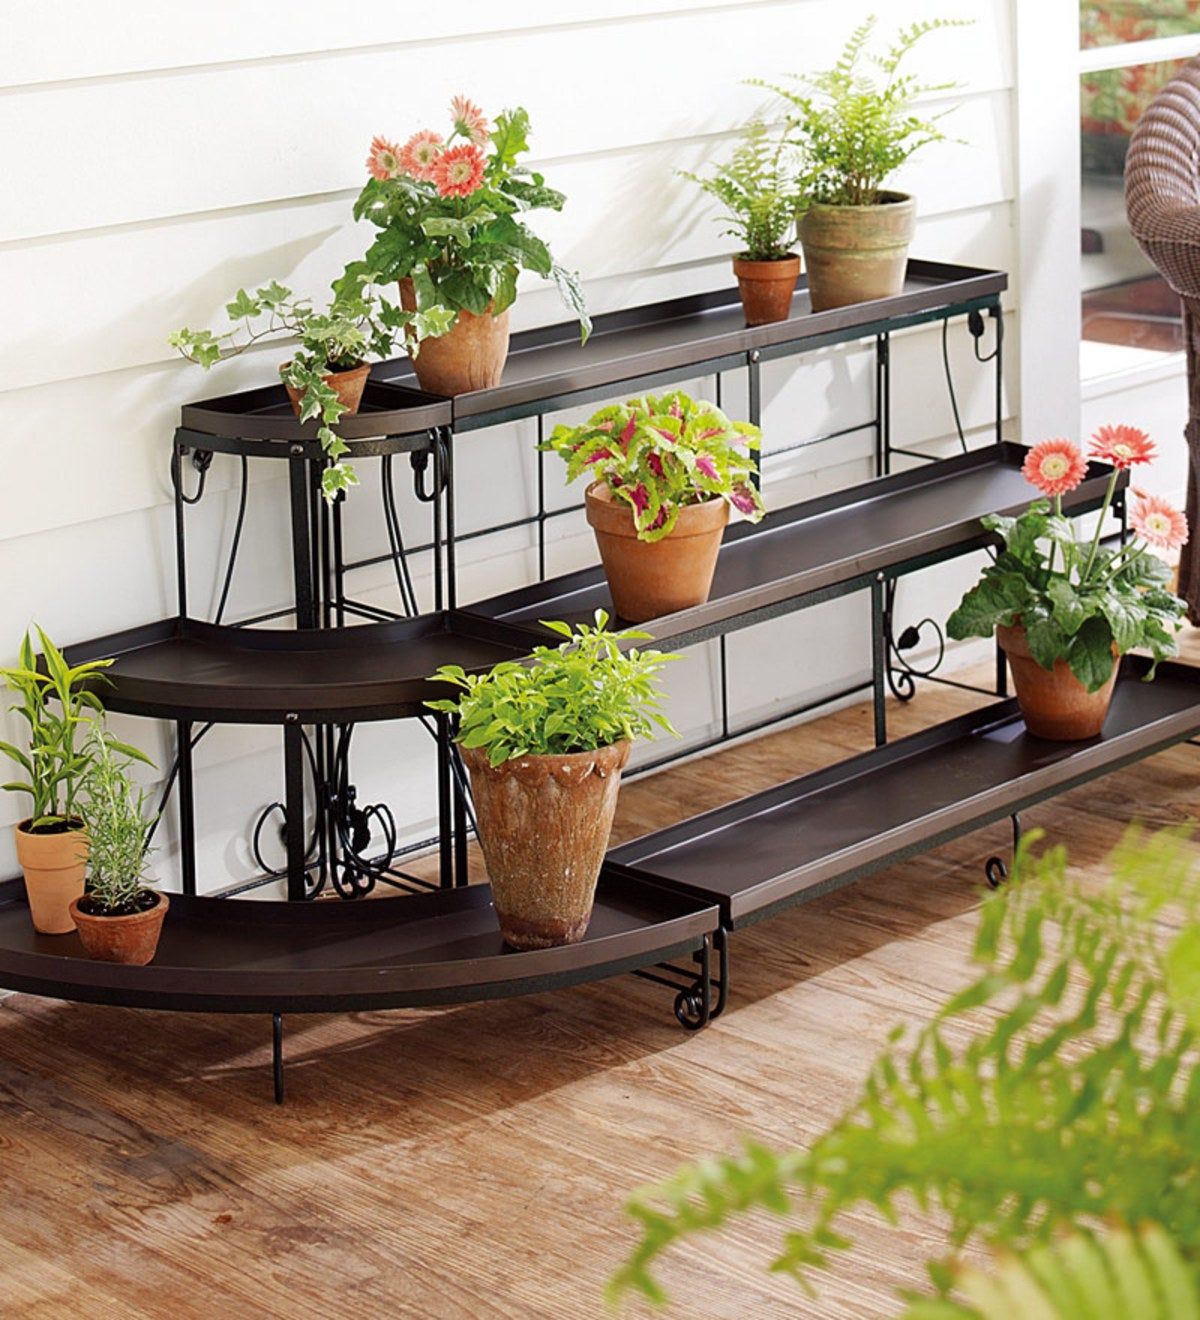 Three Tier Embellished Steel Plant Stand Set | Plowhearth With Regard To Three Tier Plant Stands (View 3 of 15)